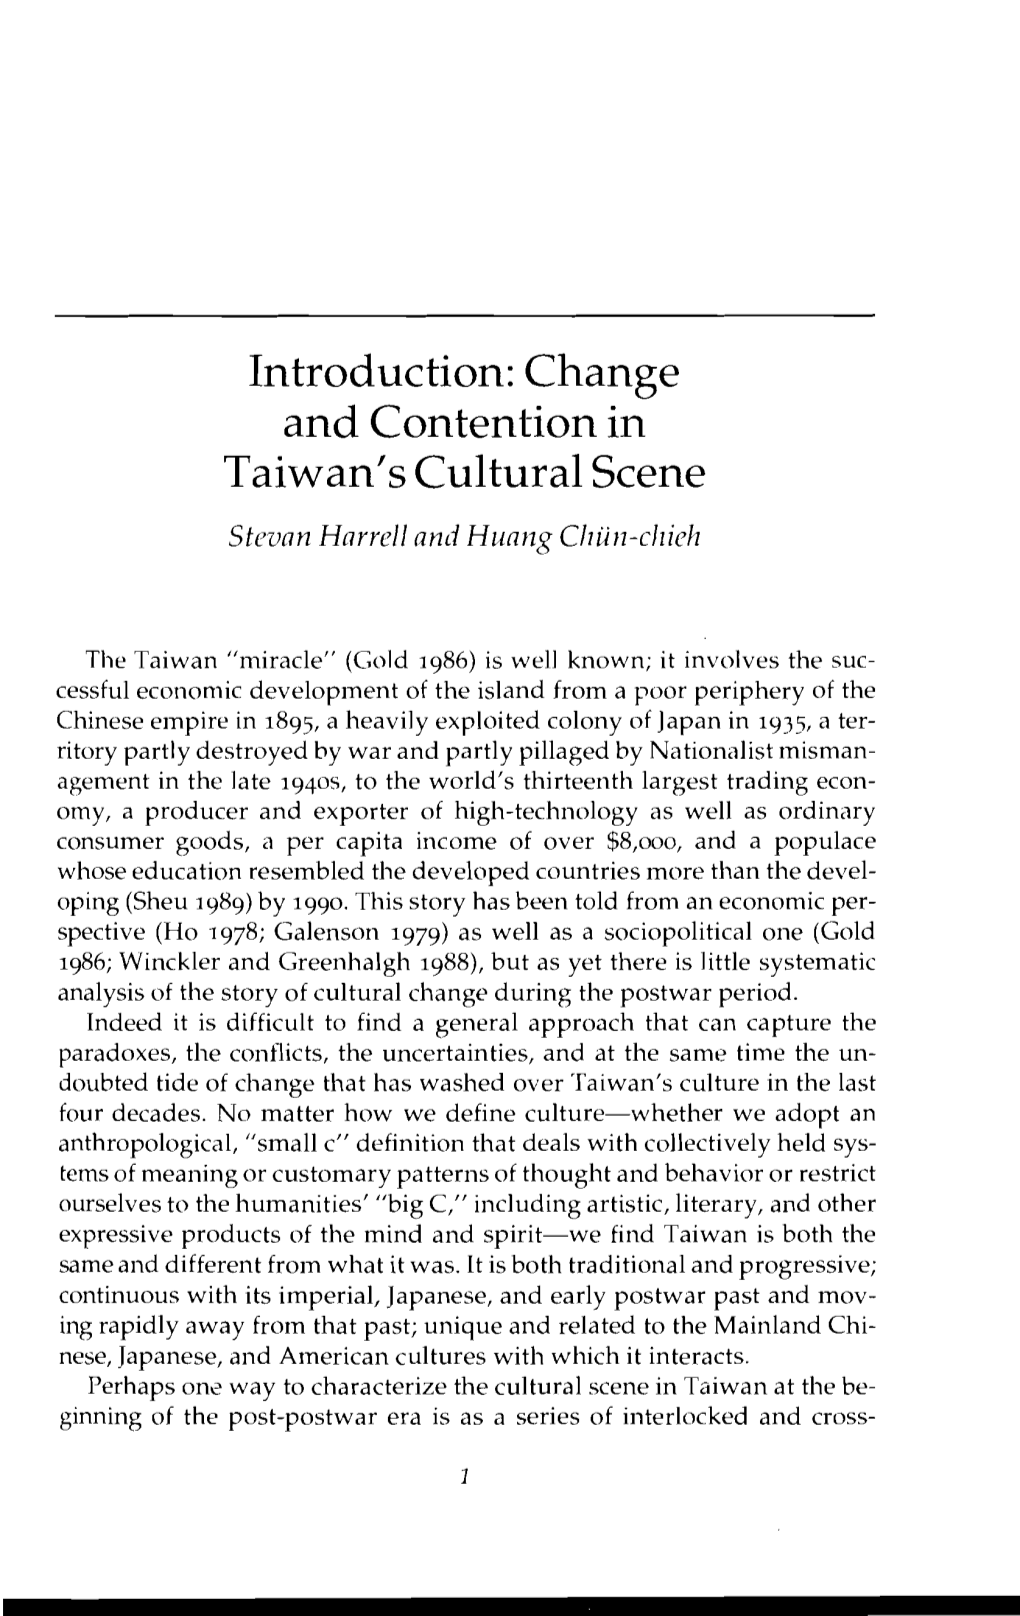 Introduction: Change and Contention in Taiwan's Cultural Scene Stevan Harrcll and Hua~Zgciiiin-Chick